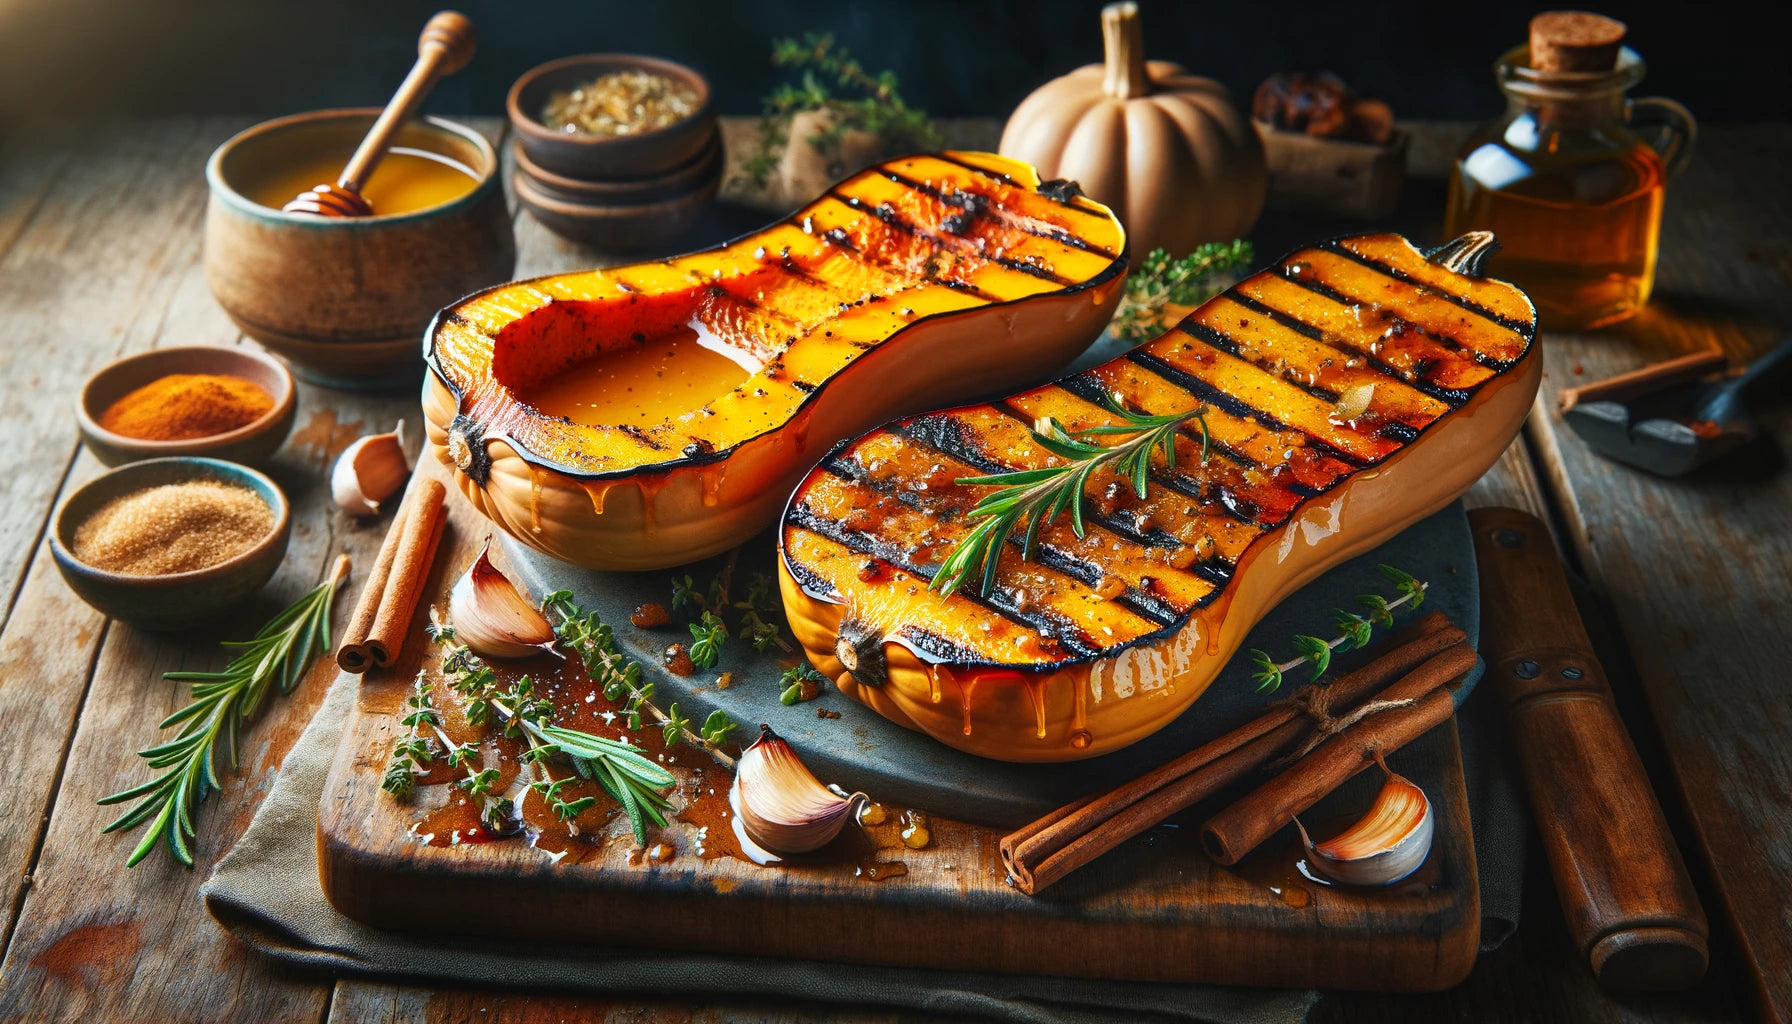 Grilled Butternut Squash Two Ways: Sweet & Savory Recipe on Arteflame Grill